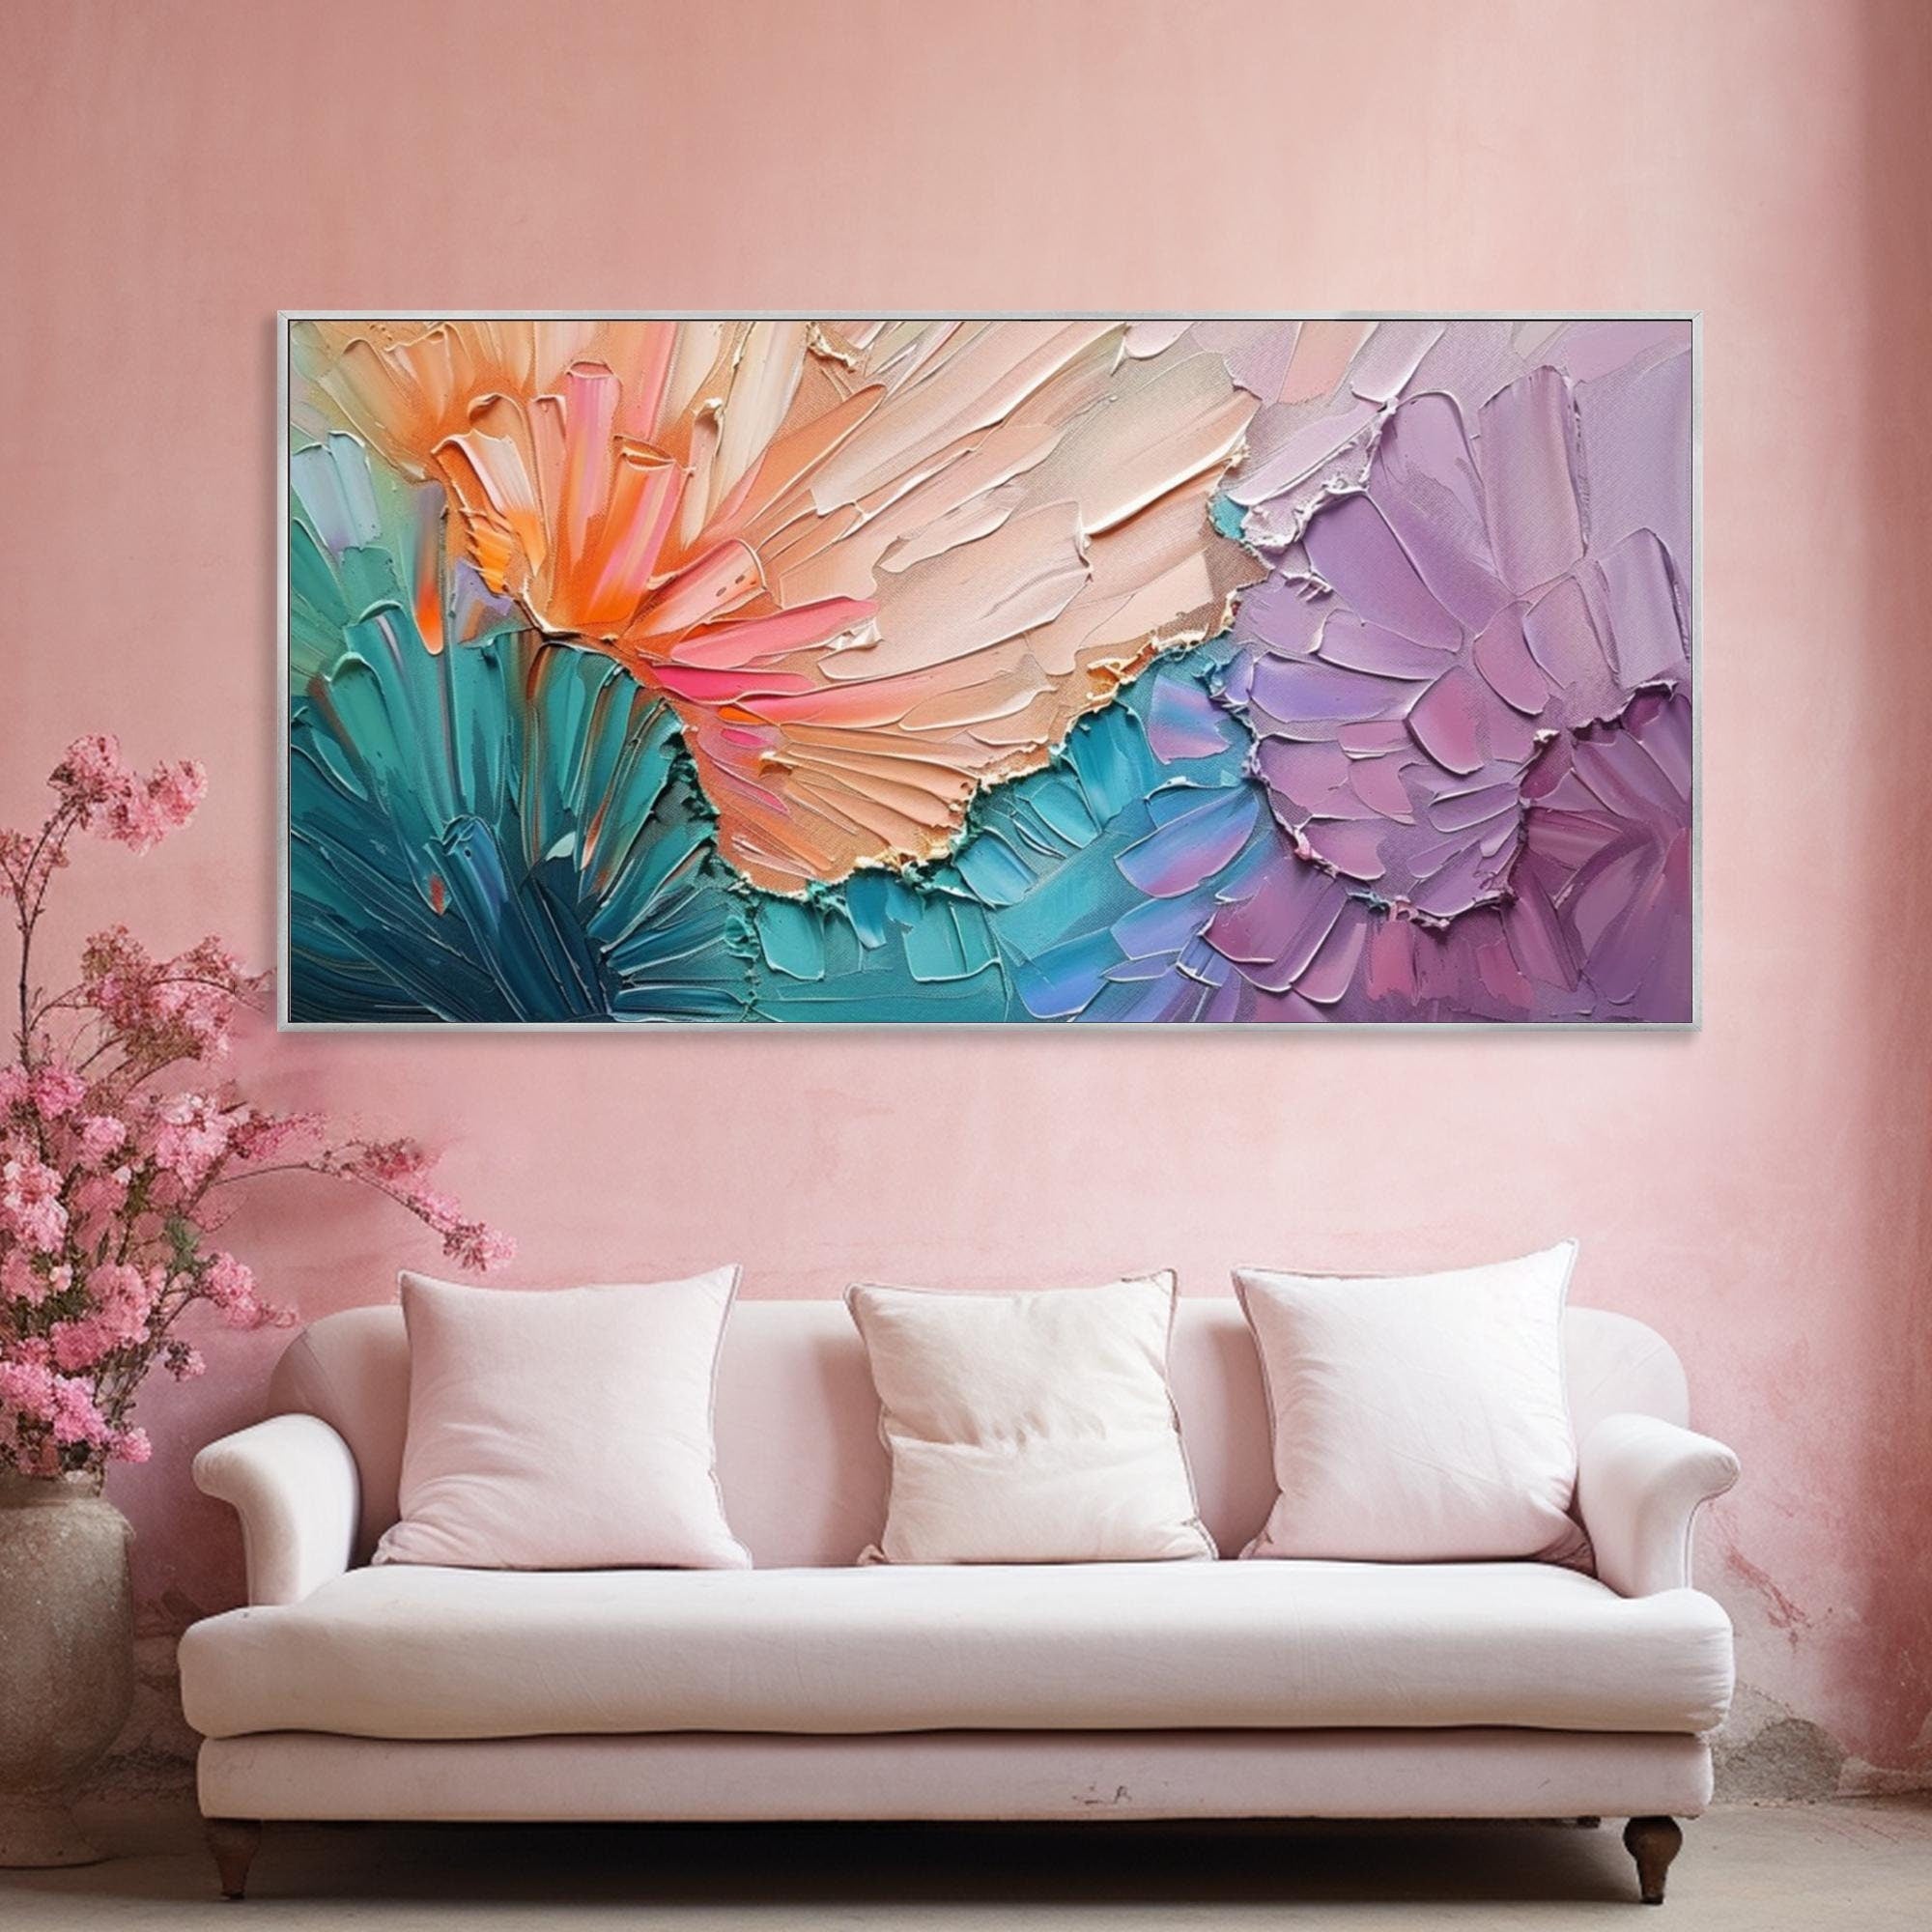 The Art of Personalization: Custom Oil Paintings in Home Decor